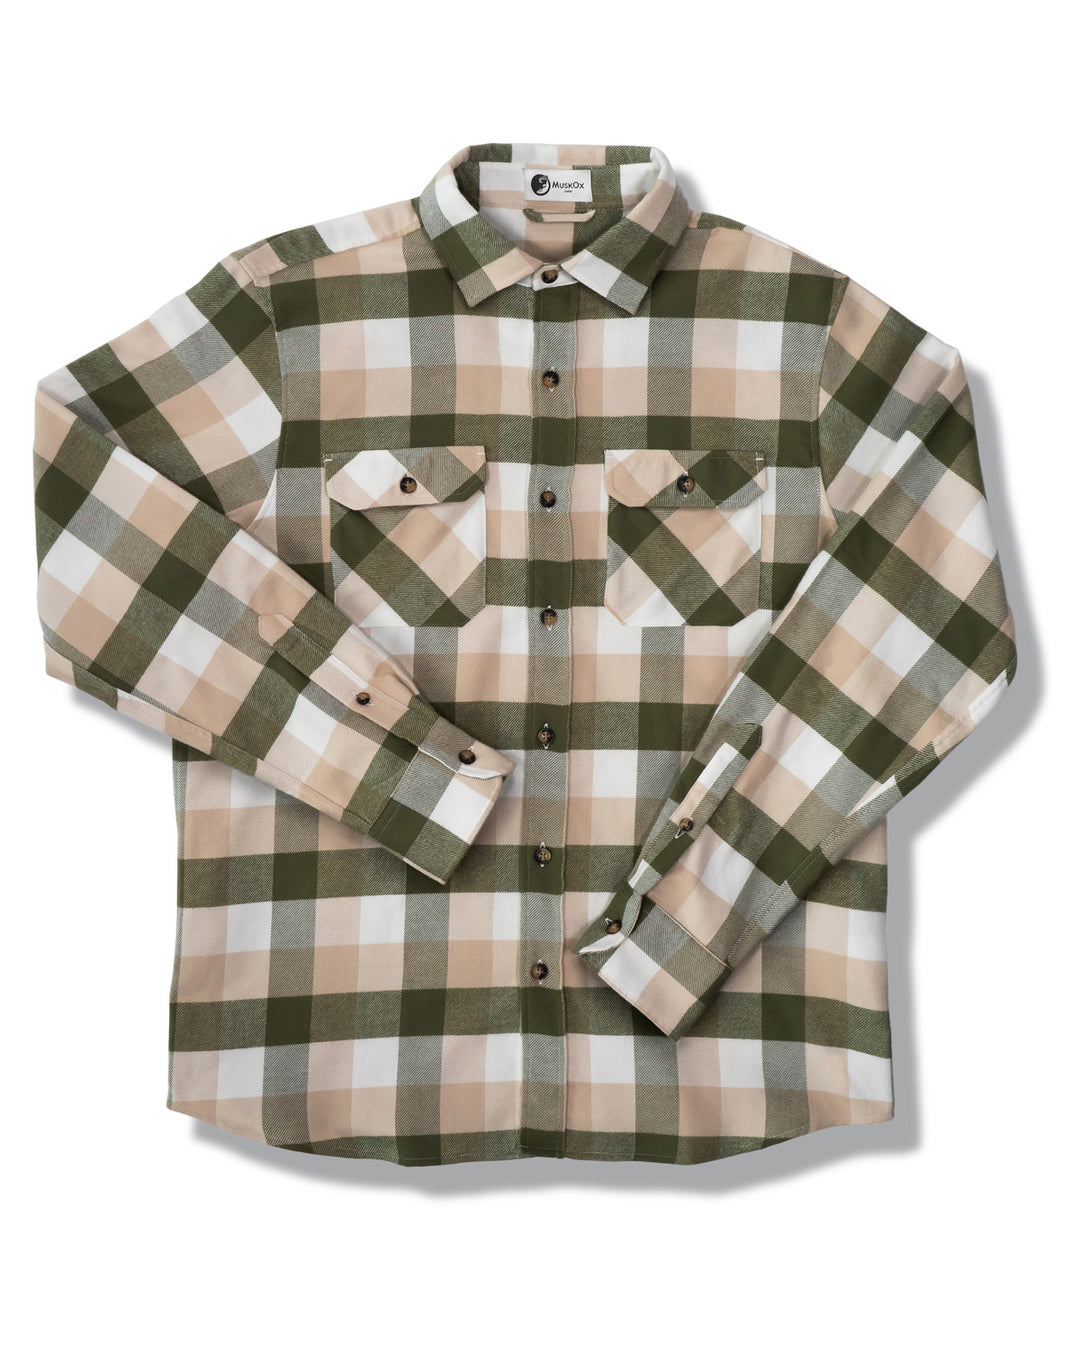 Three Seasons Flannel, Soft and Durable Flannel Shirt for Men